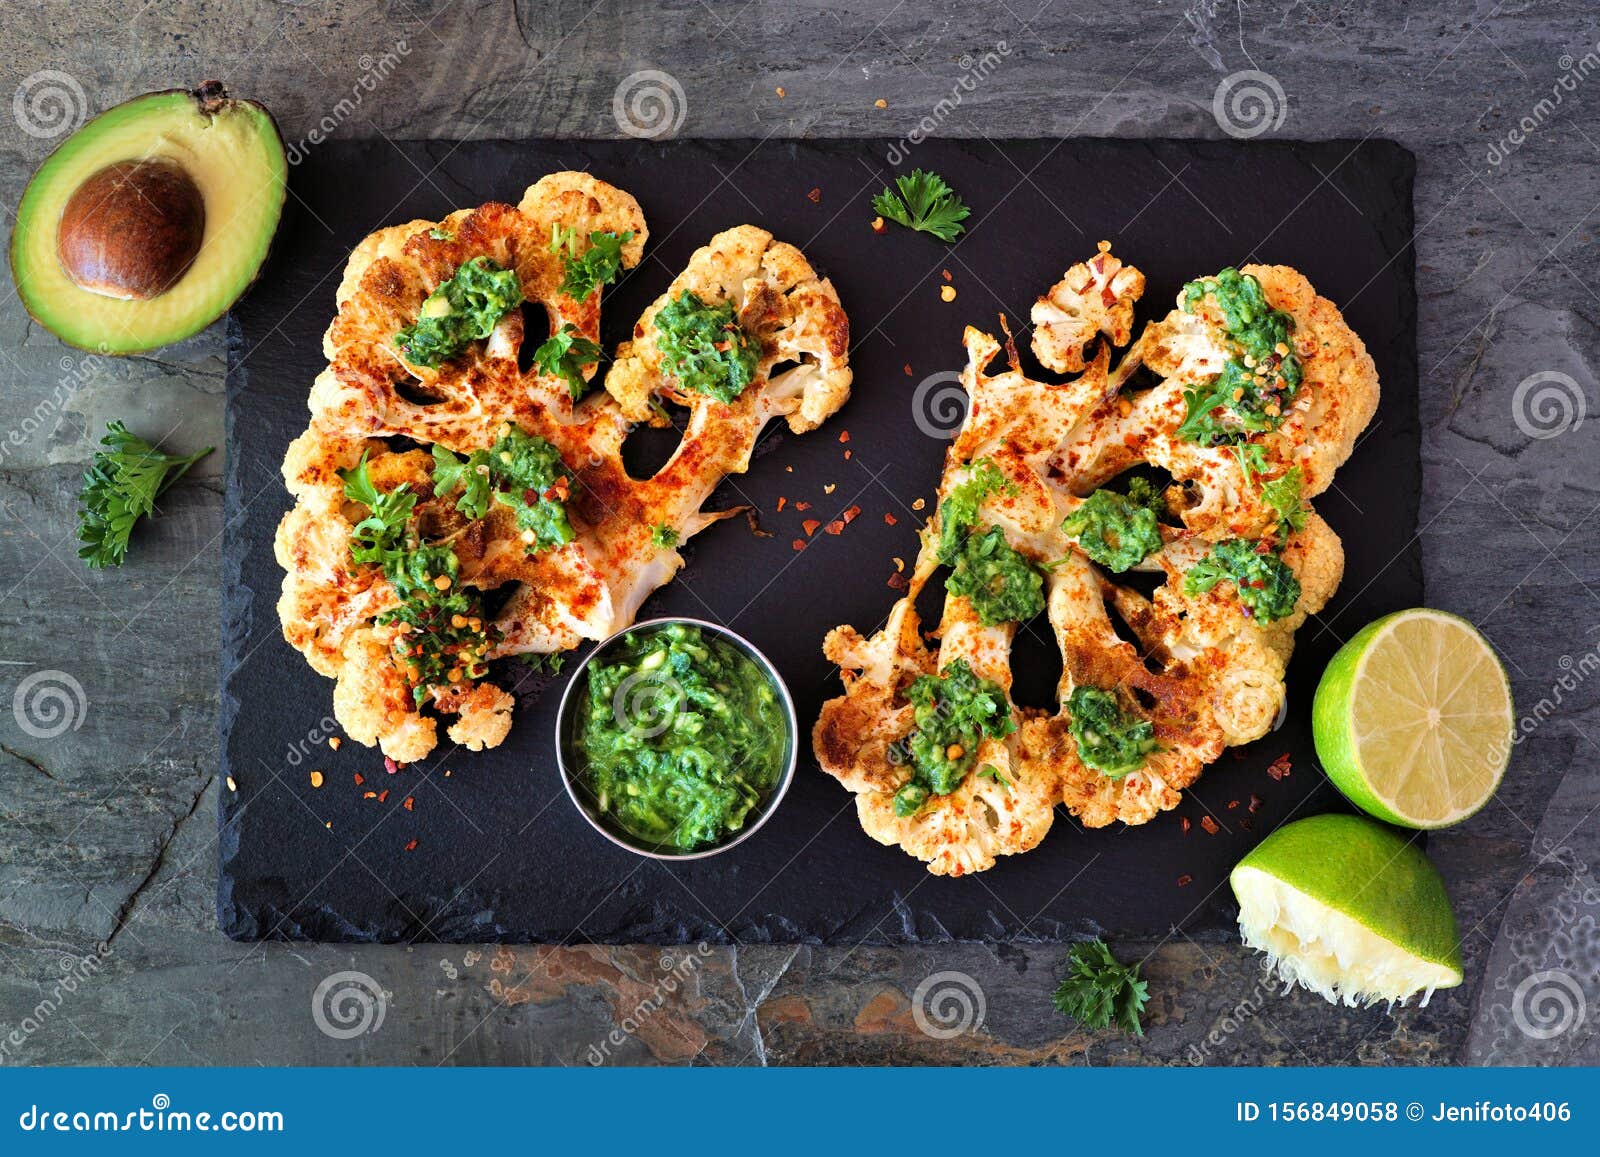 cauliflower steaks above view on a slate platter, healthy plant based meat substitute concept